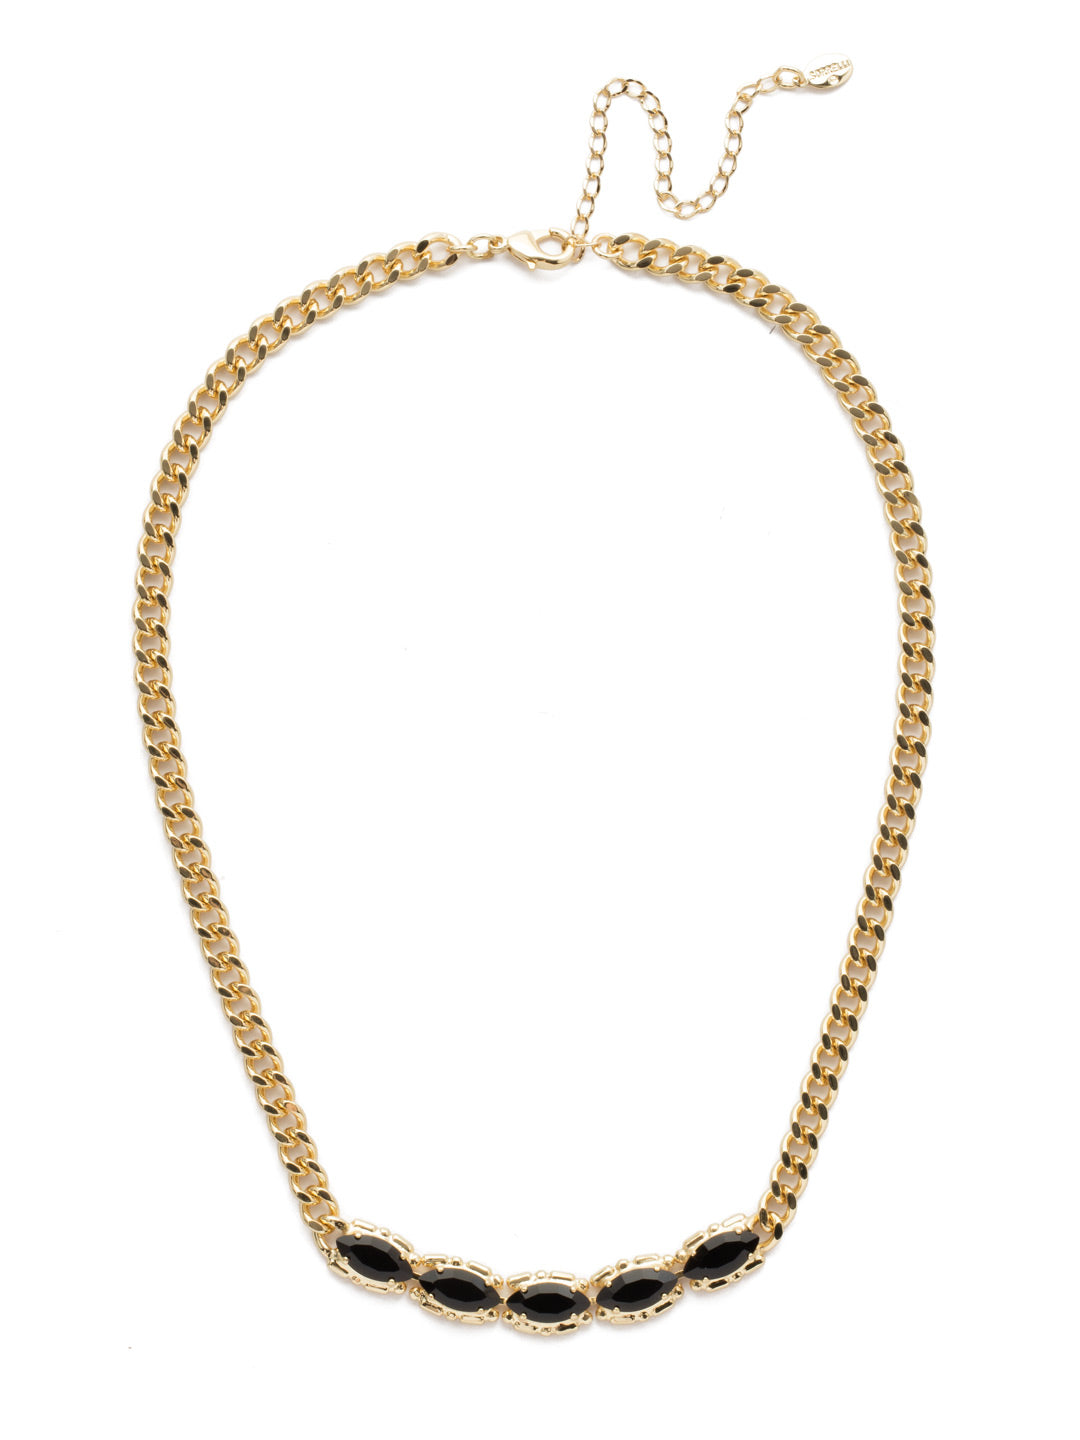 Yara Classic Necklace - NEF5BGJET - This intricate box-chain necklace finished with a line of dancing crystals is sure to make any outfit a bold statement.